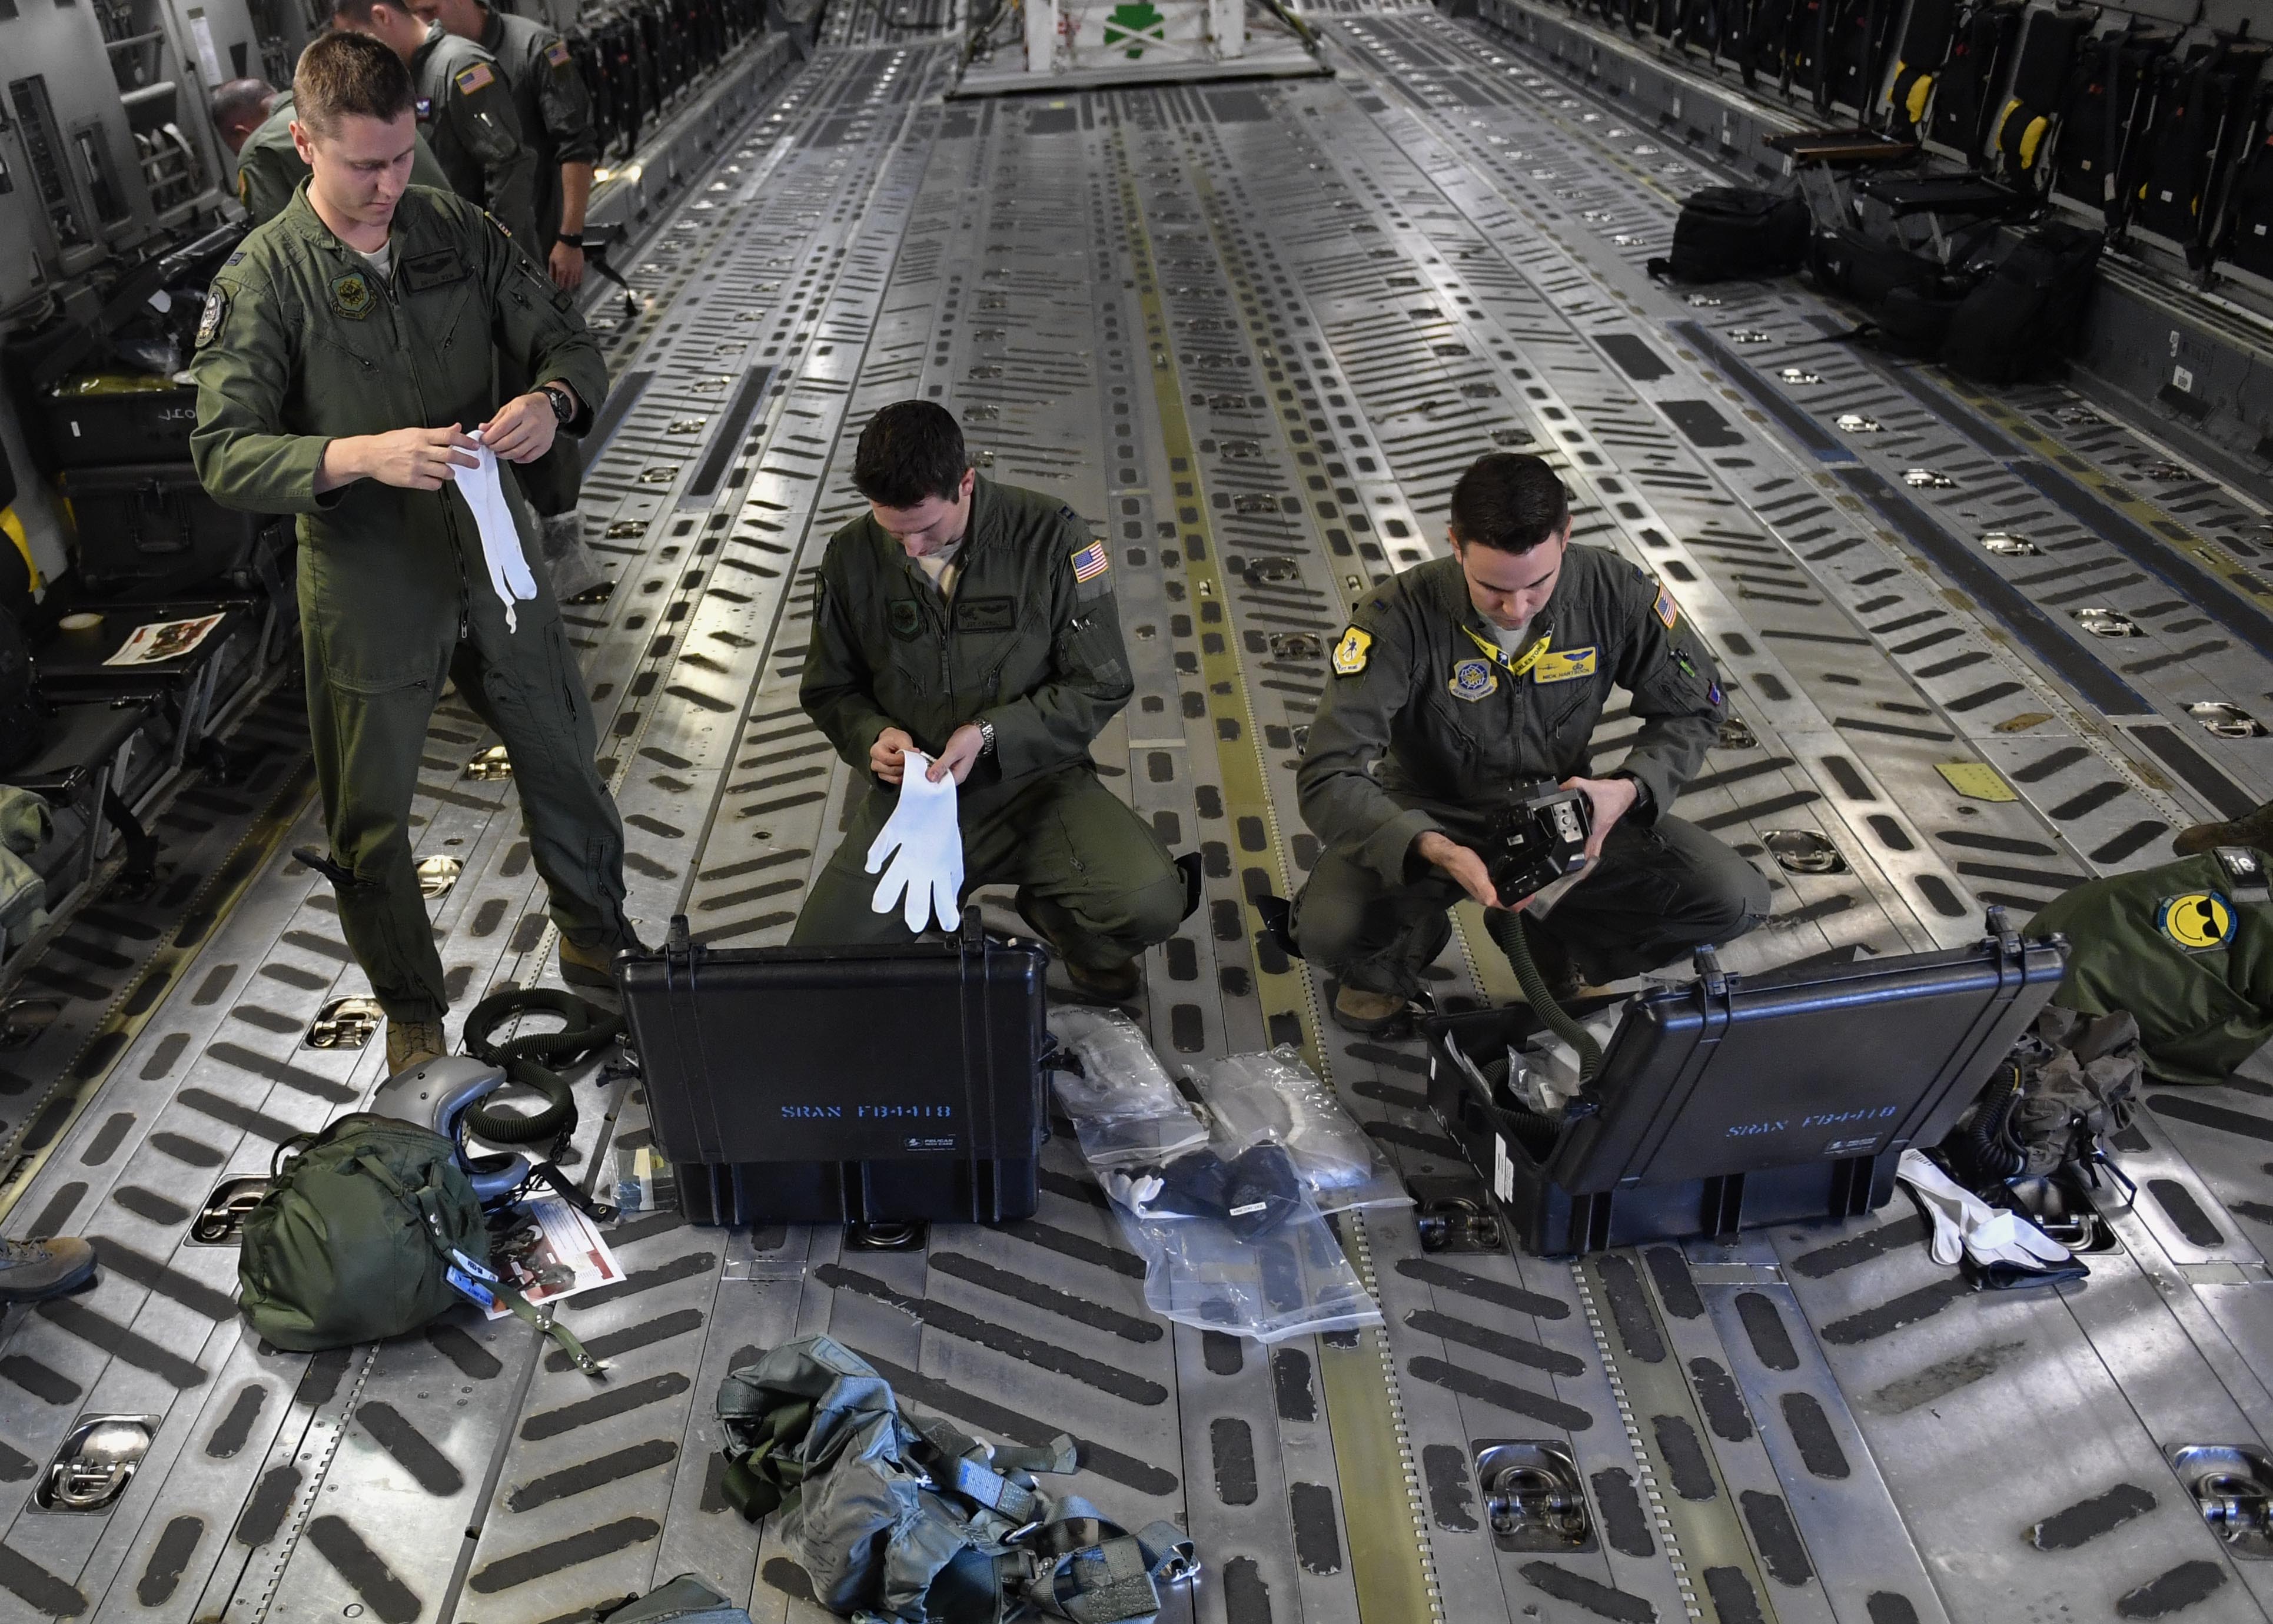 aircrew-complete-in-flight-training-with-protection-equipment-air-mobility-command-article